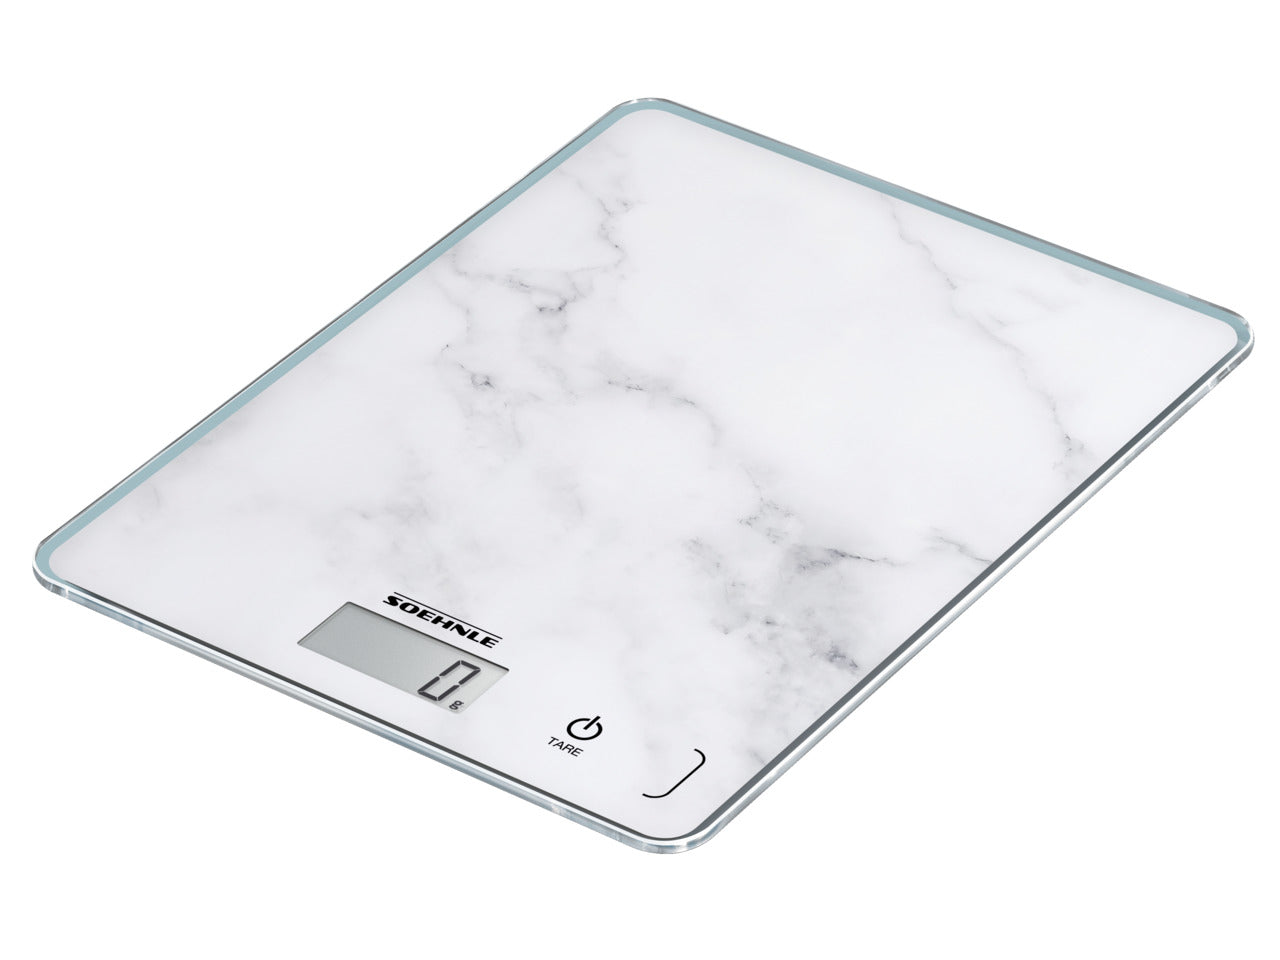 Soehnle Kitchen Scale Page Compact 300 Marble S61516